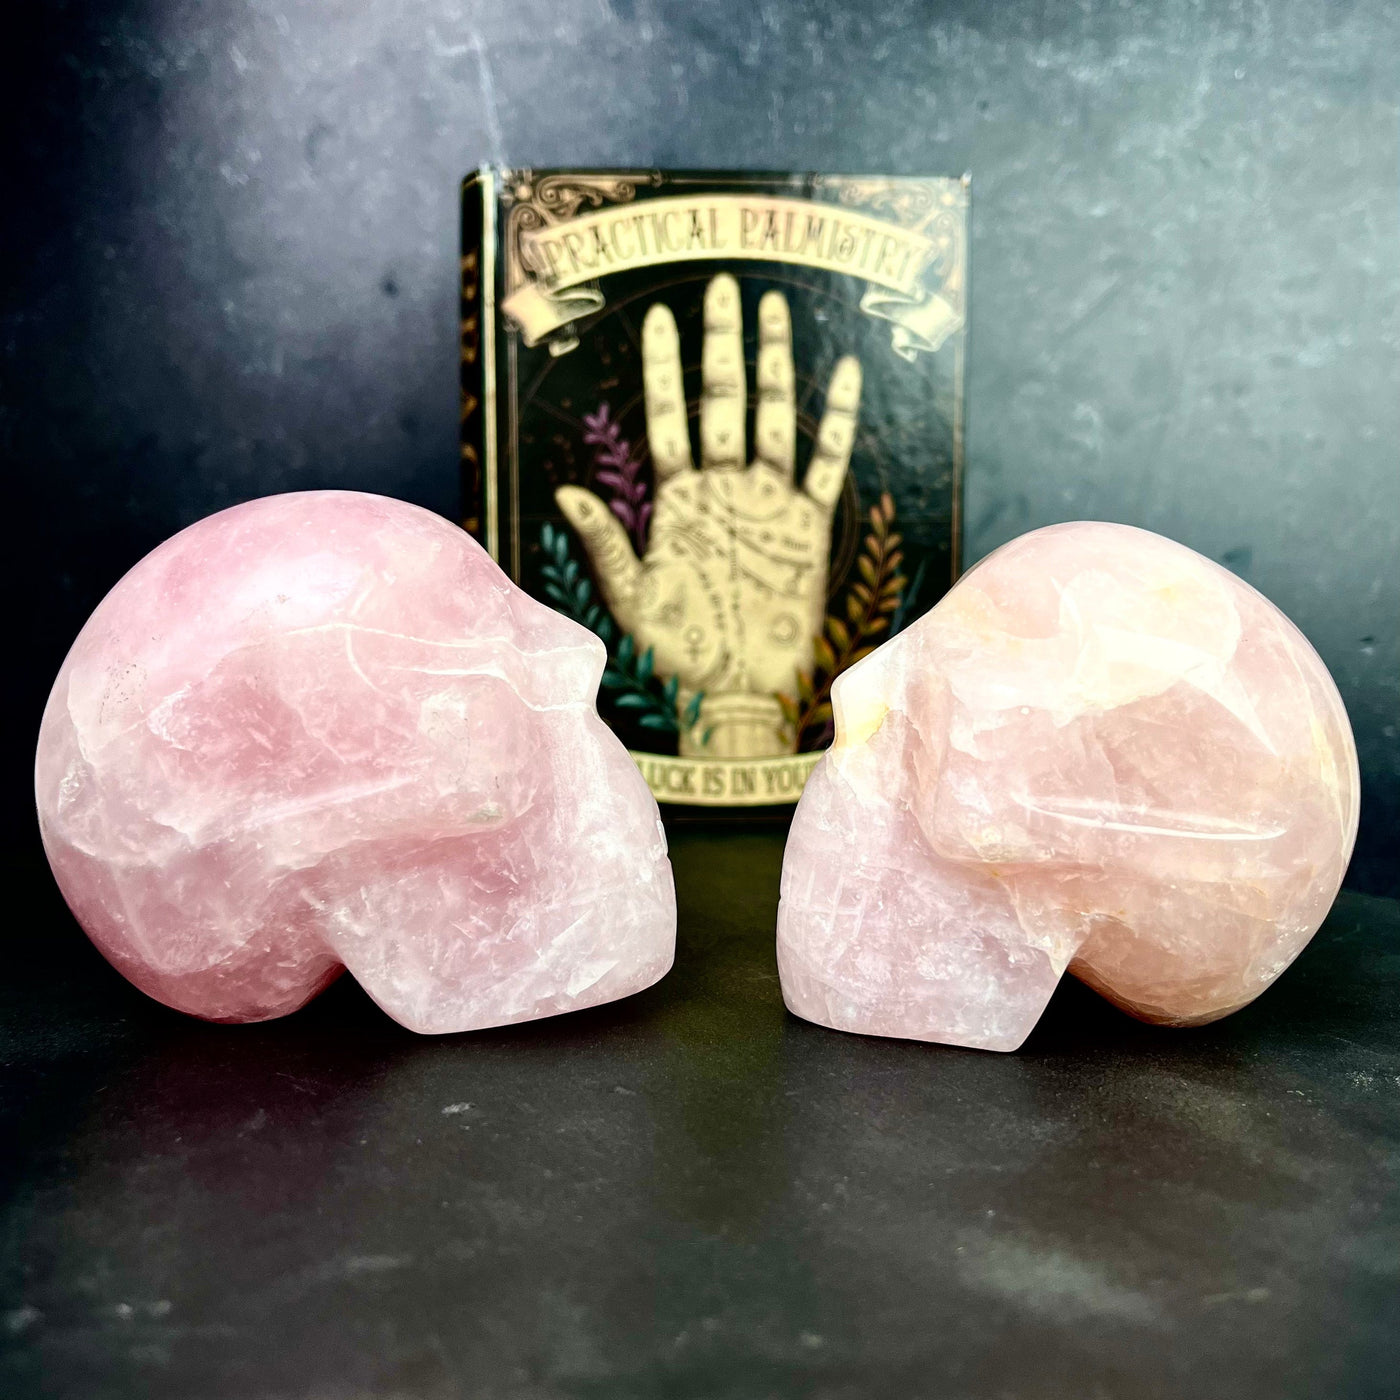 Two side profile views of Rose Quartz Polished Skulls, facing each other, on a black surface.